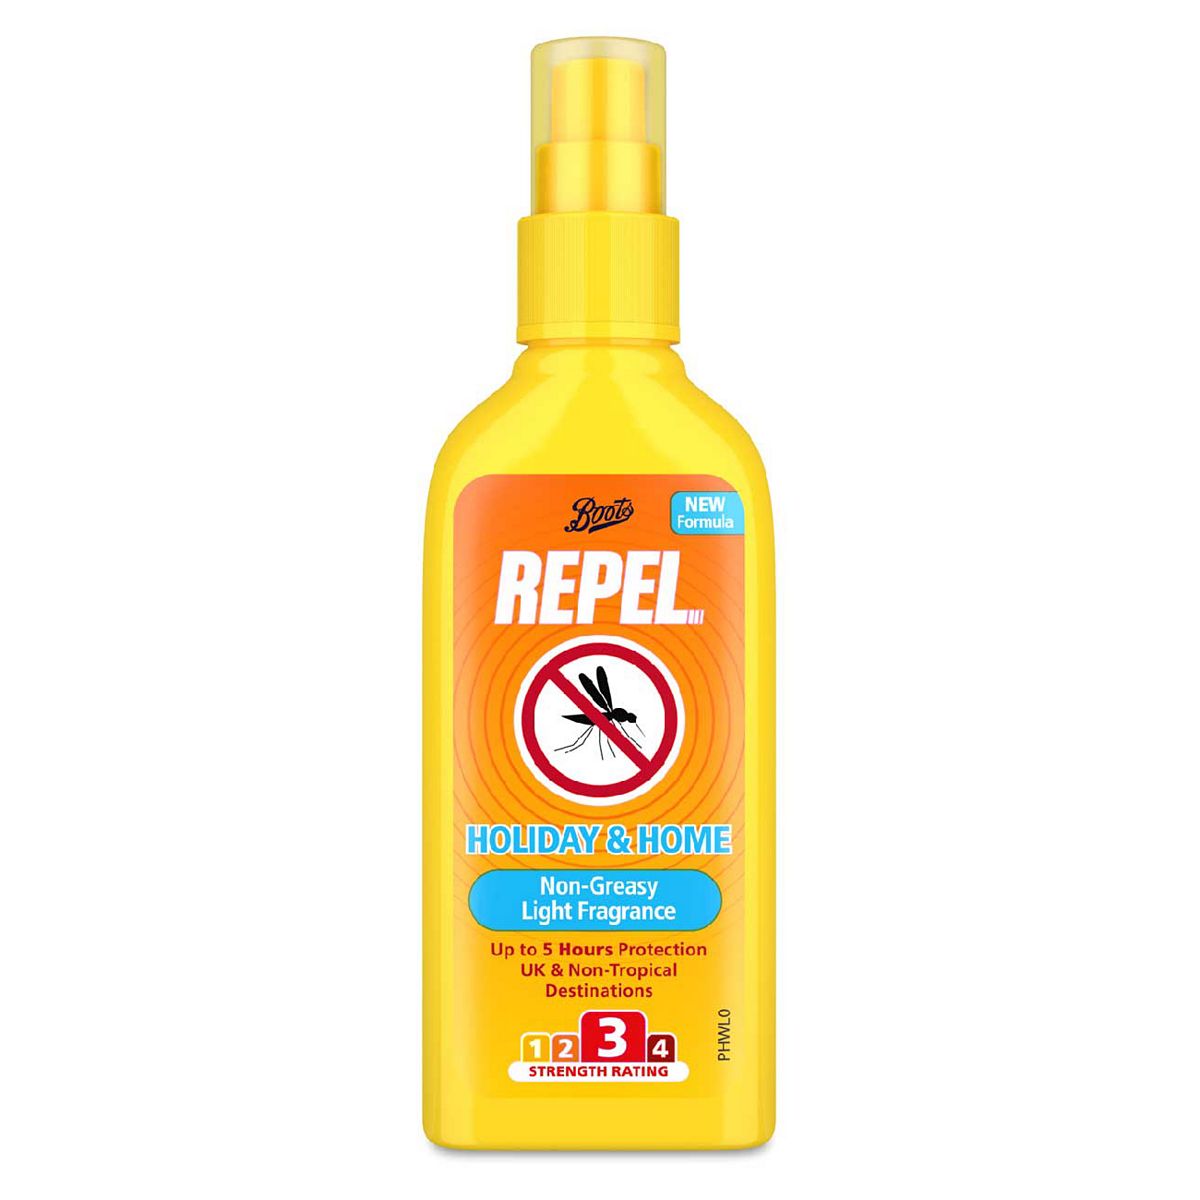 Boots Repel Holiday & Home Pump Spray 100ml GOODS Boots   